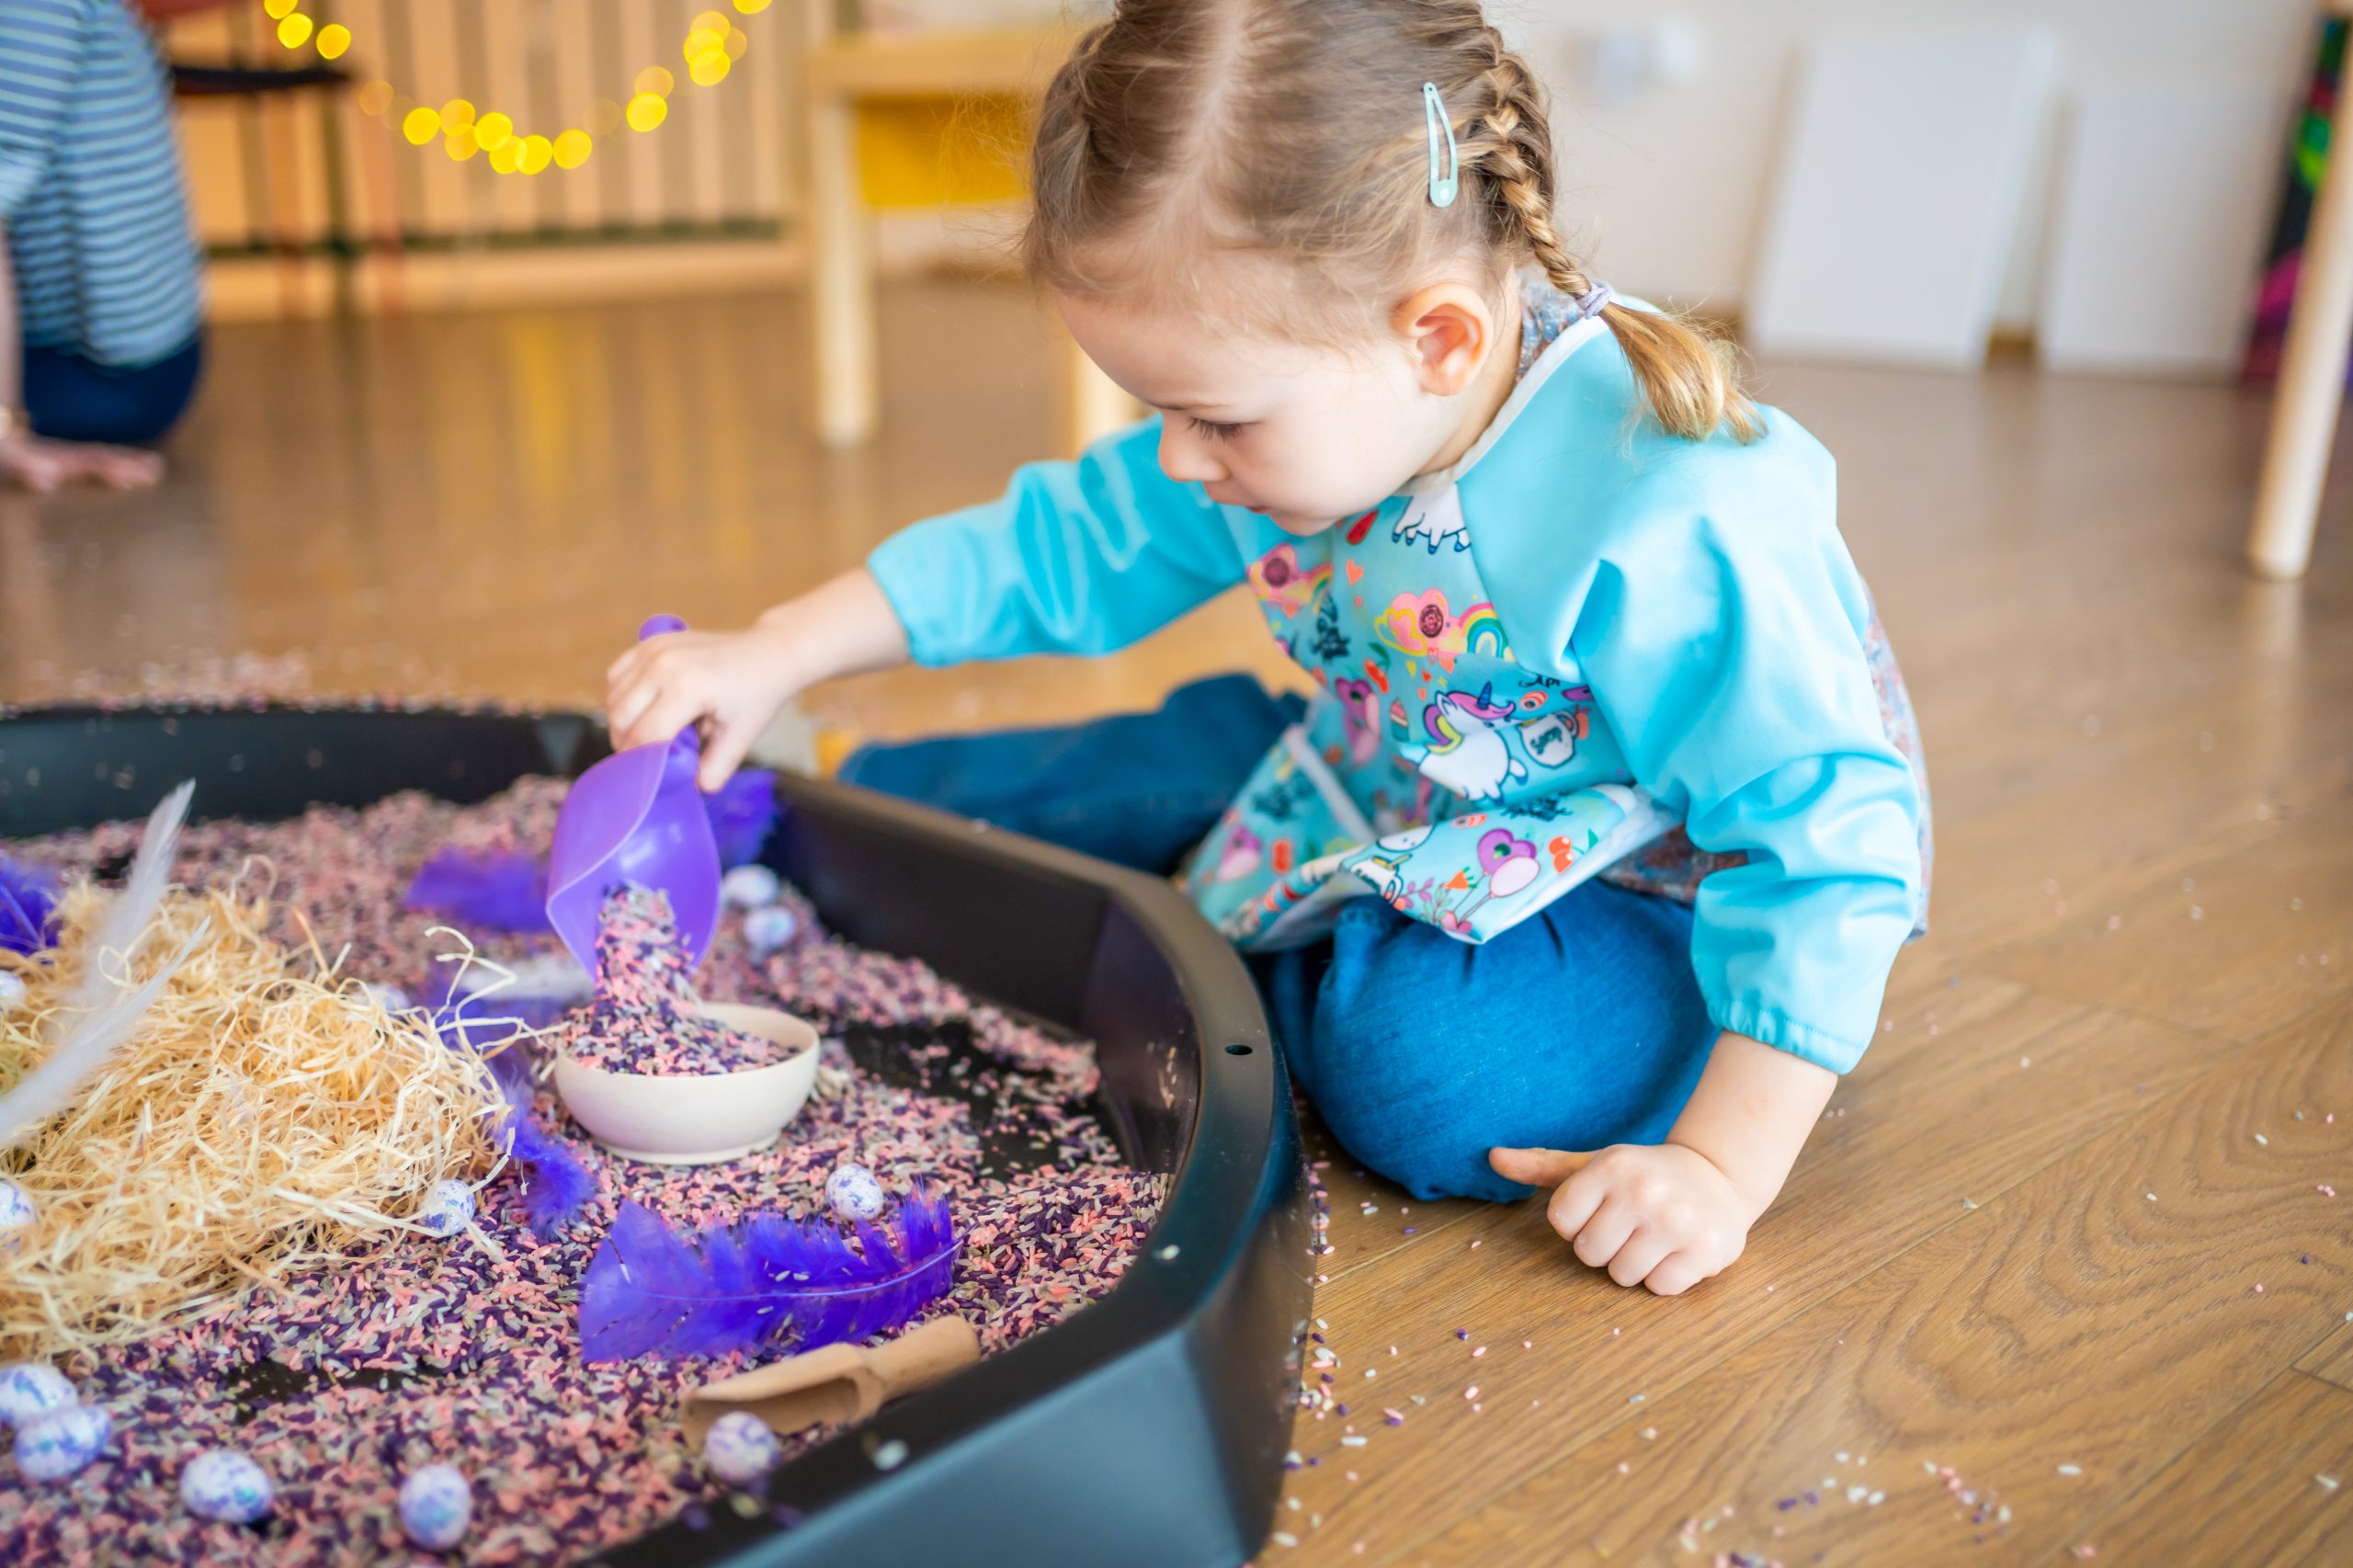 Little girl playing with sensory colorful rice. Sensory development and experiences, themed activities with children, fine motor skills development